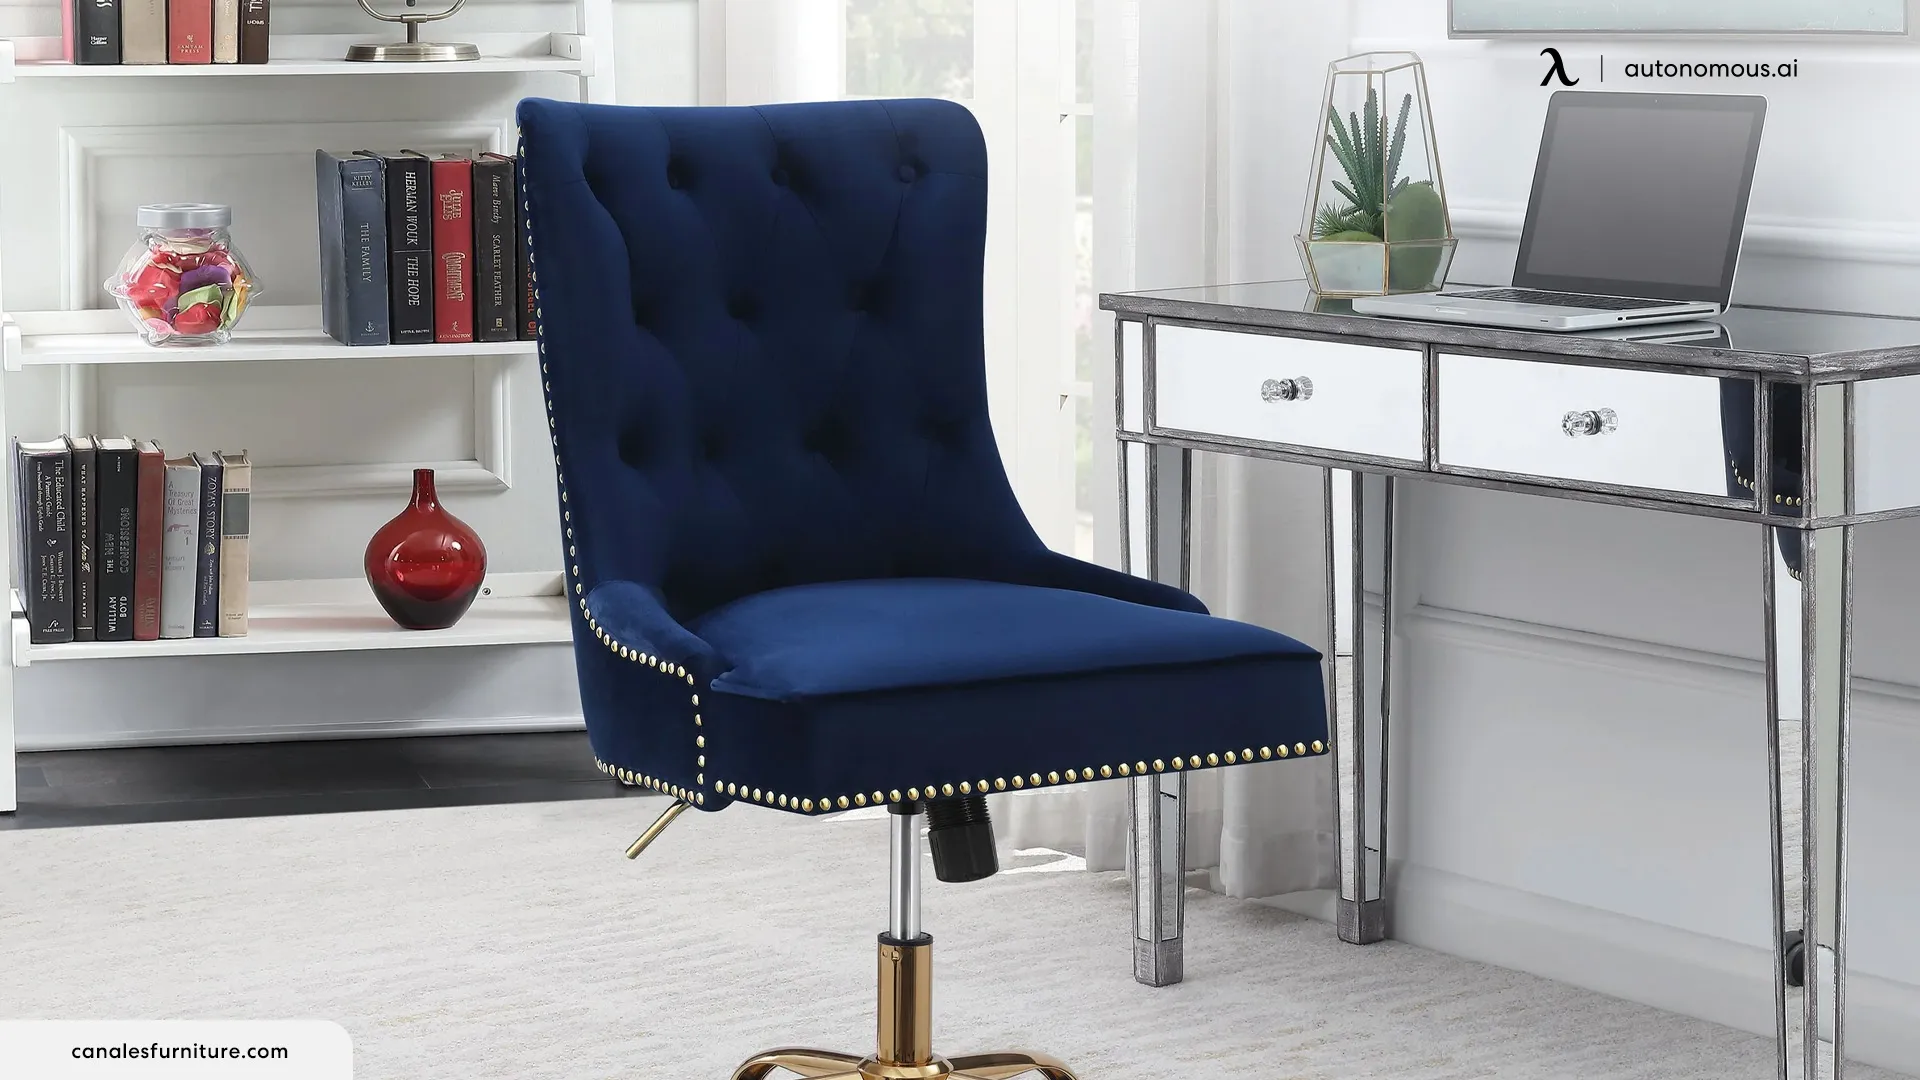 Canales Furniture - office chair in Dallas